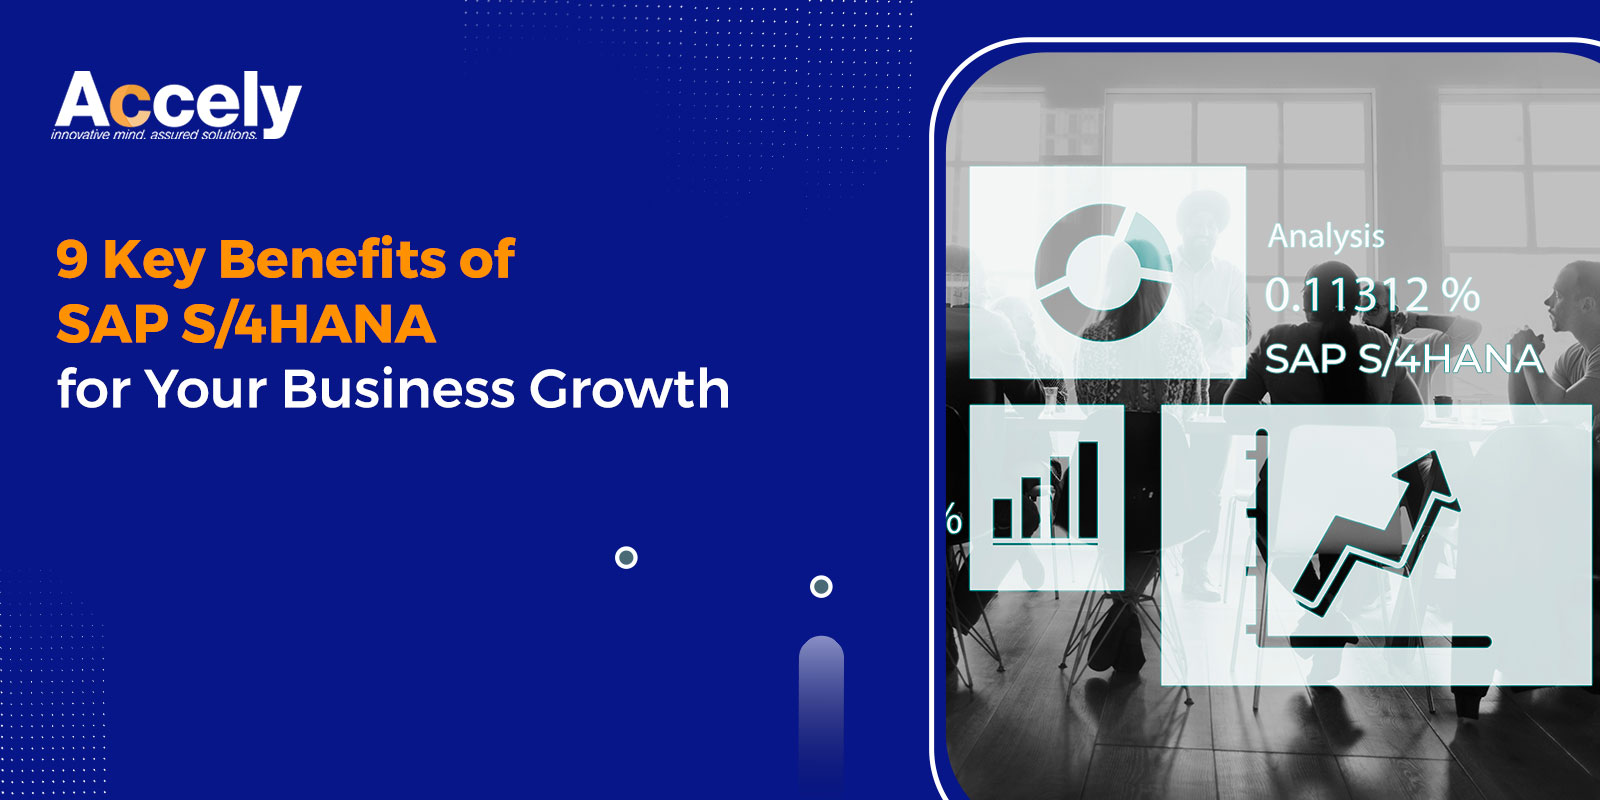 9 Key Benefits of SAP S/4HANA for Your Business Growth